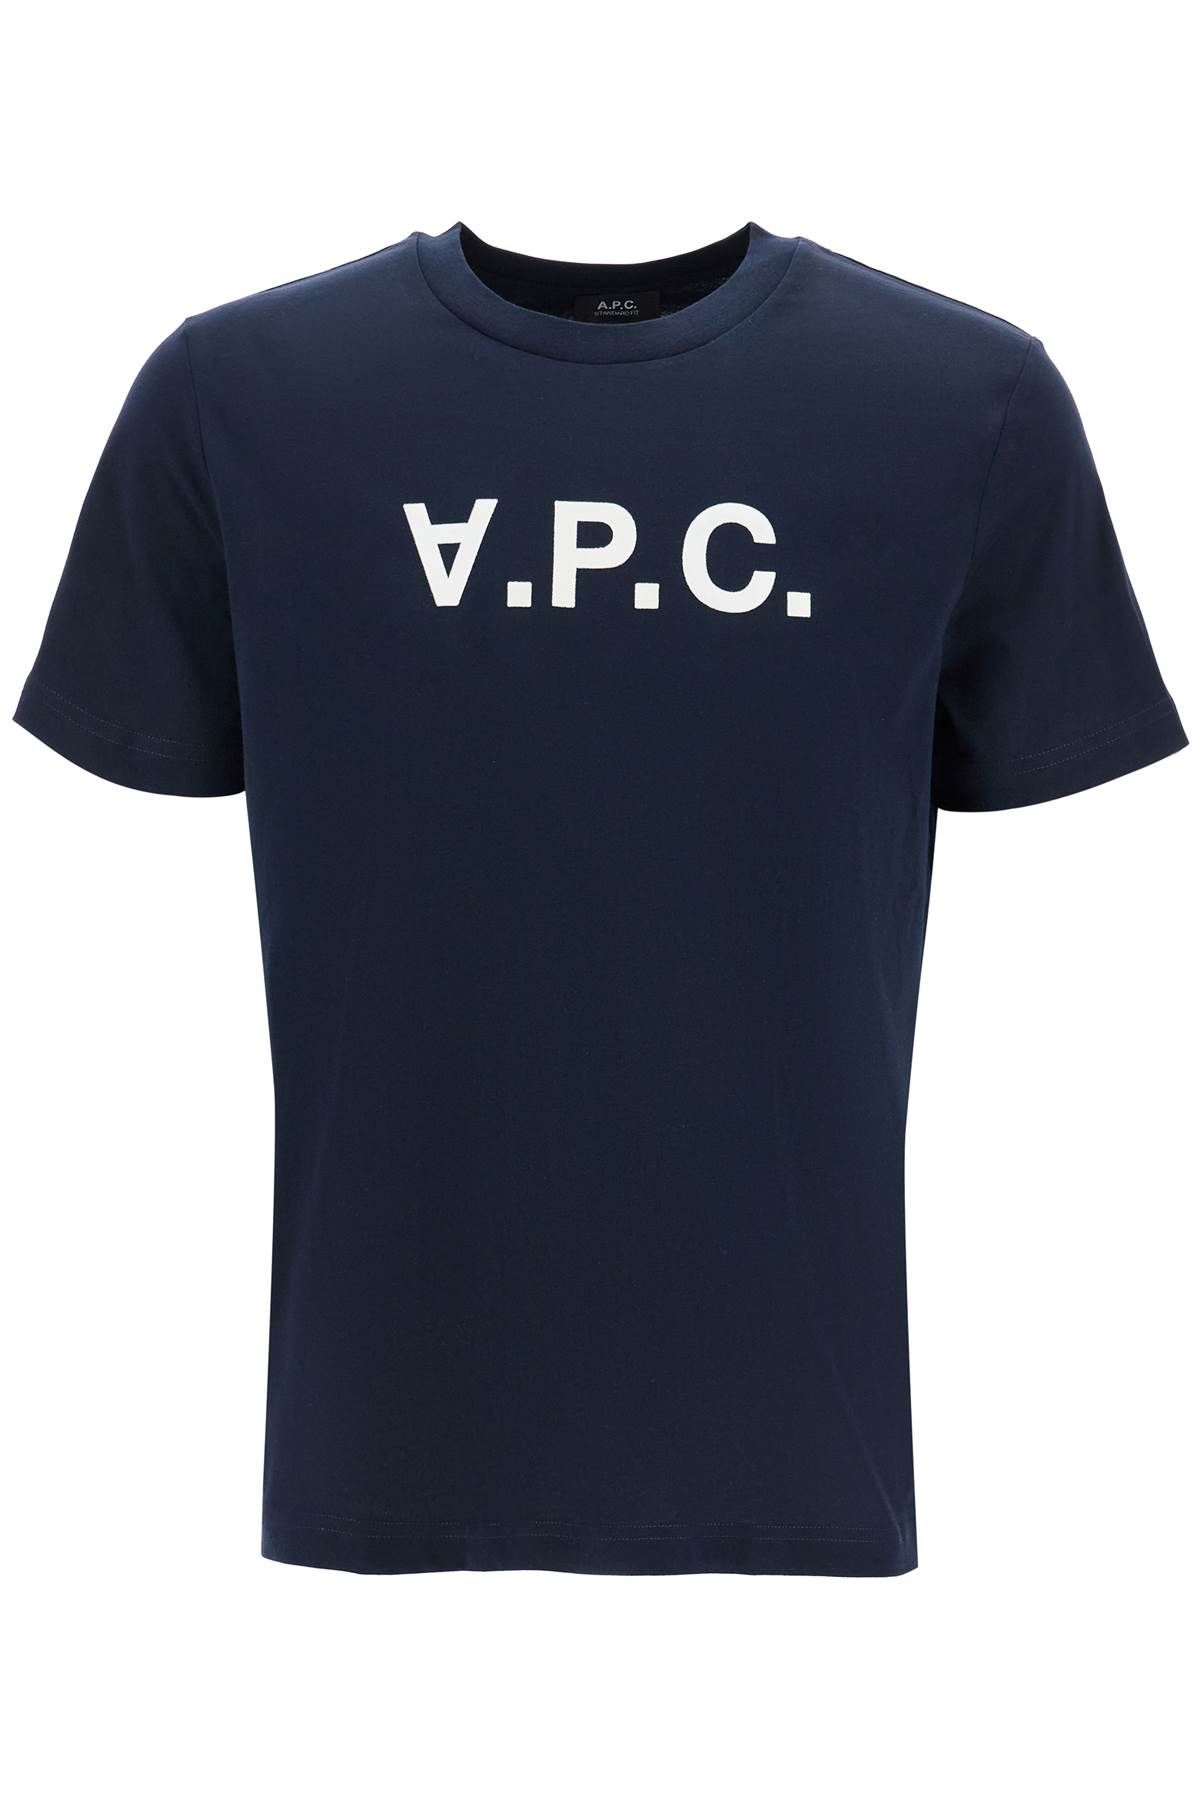 A.P.C. A. P.C. "large vpc t